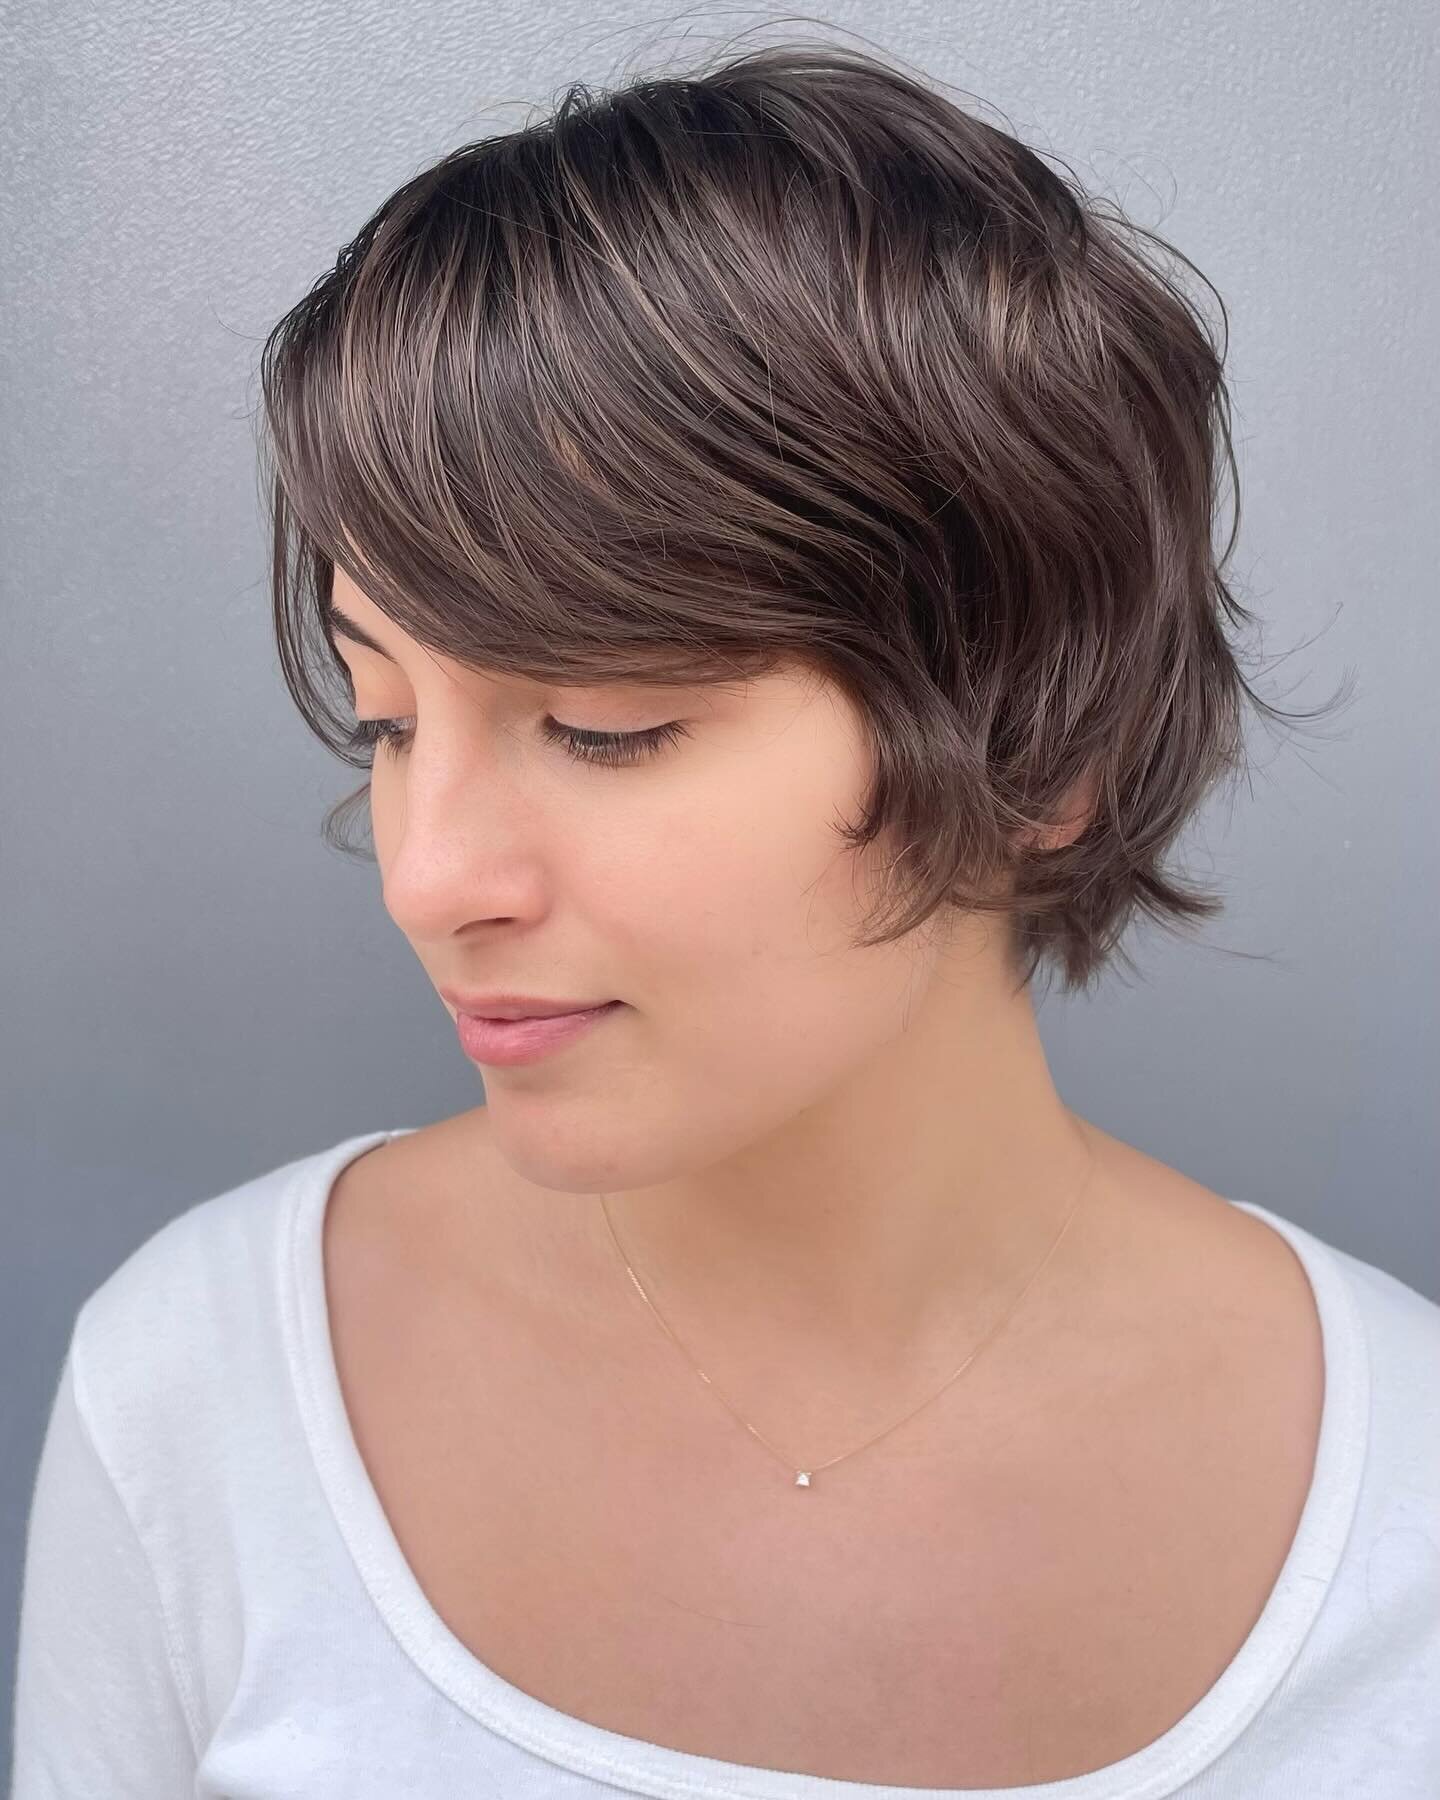 New Look for Jess💞

Shorter hair is having a moment this spring  and we&rsquo;re here for it ! 🌸

H/C by Robin @disheveled_elegance 
.
.
.
#shorthair #springhairtrends #cutecut #phillystyle #phillyhair#phillyhairstylist #bestofphilly#phillybesthair